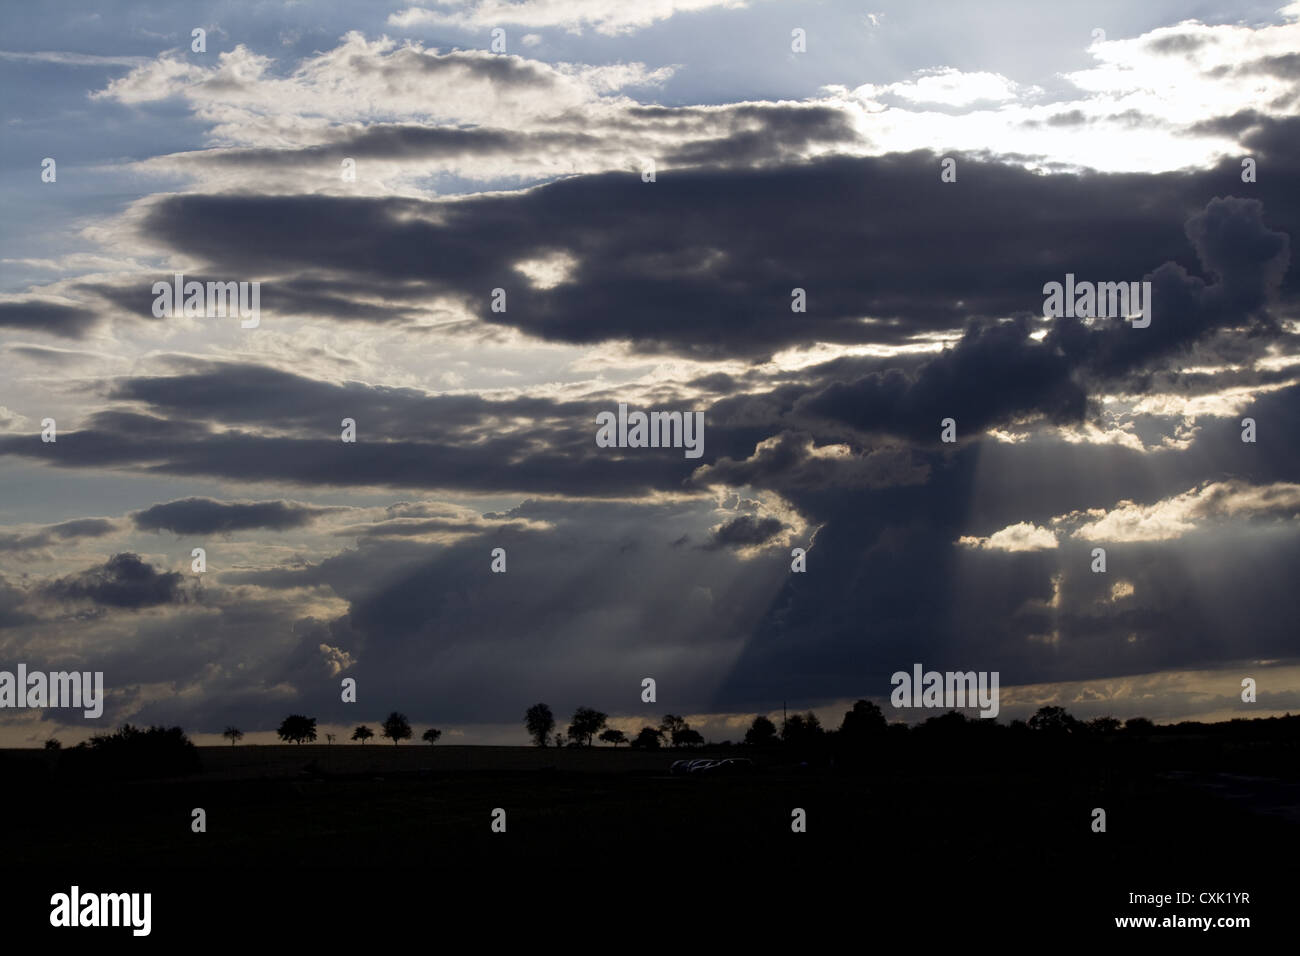 Evening, Welschbach, Saarland, Germany Stock Photo